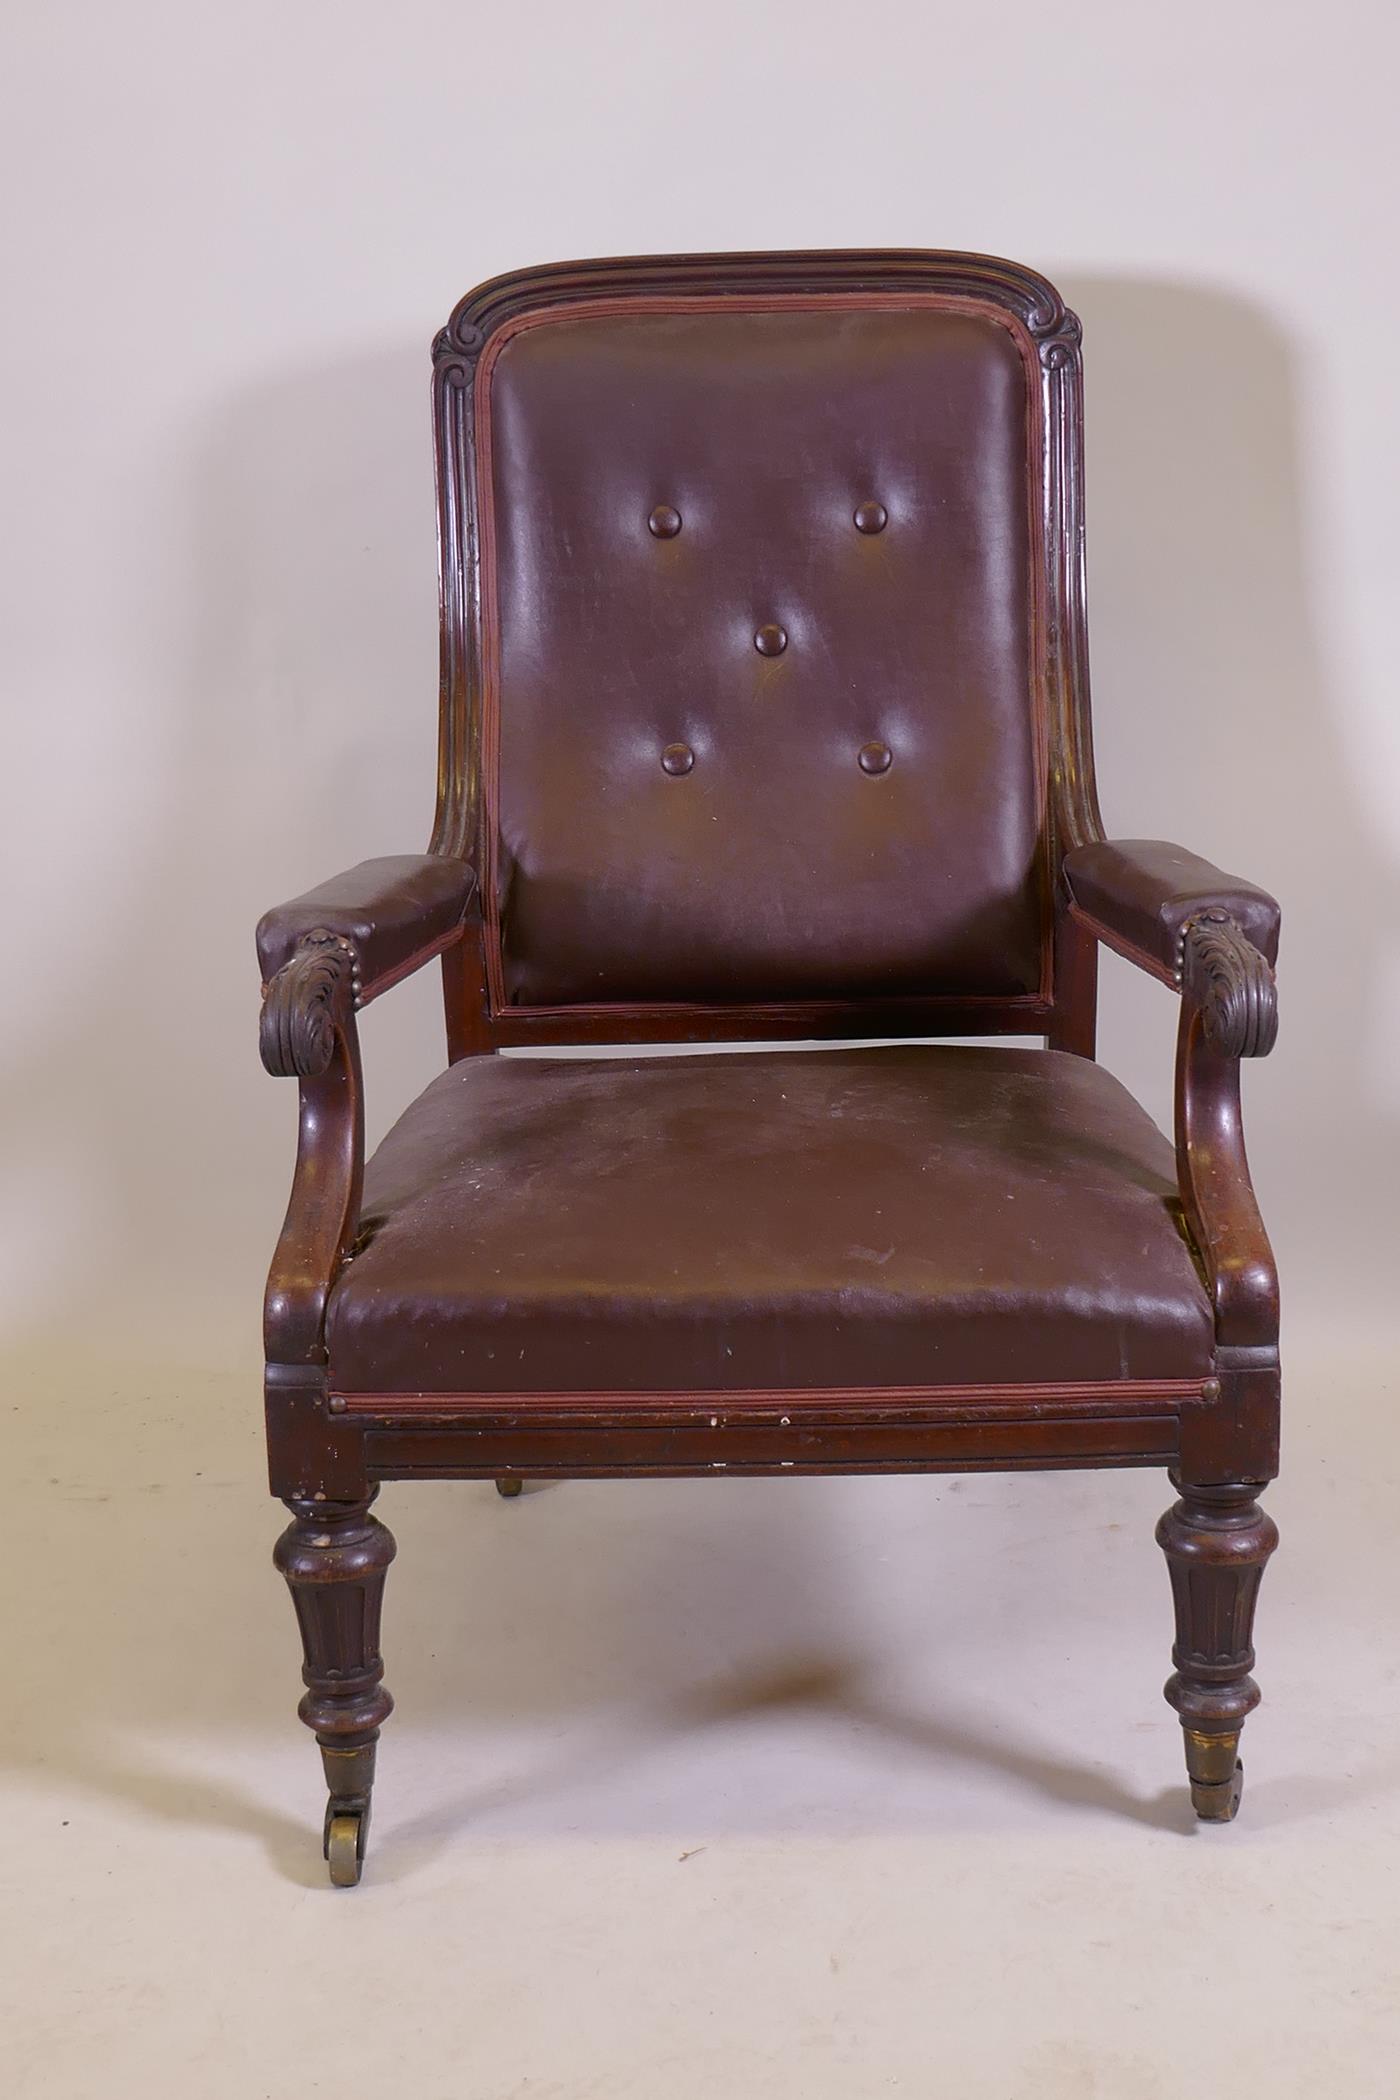 A C19th mahogany show frame armchair with reeded frame and carved and scrolled arms, raised on - Image 2 of 7